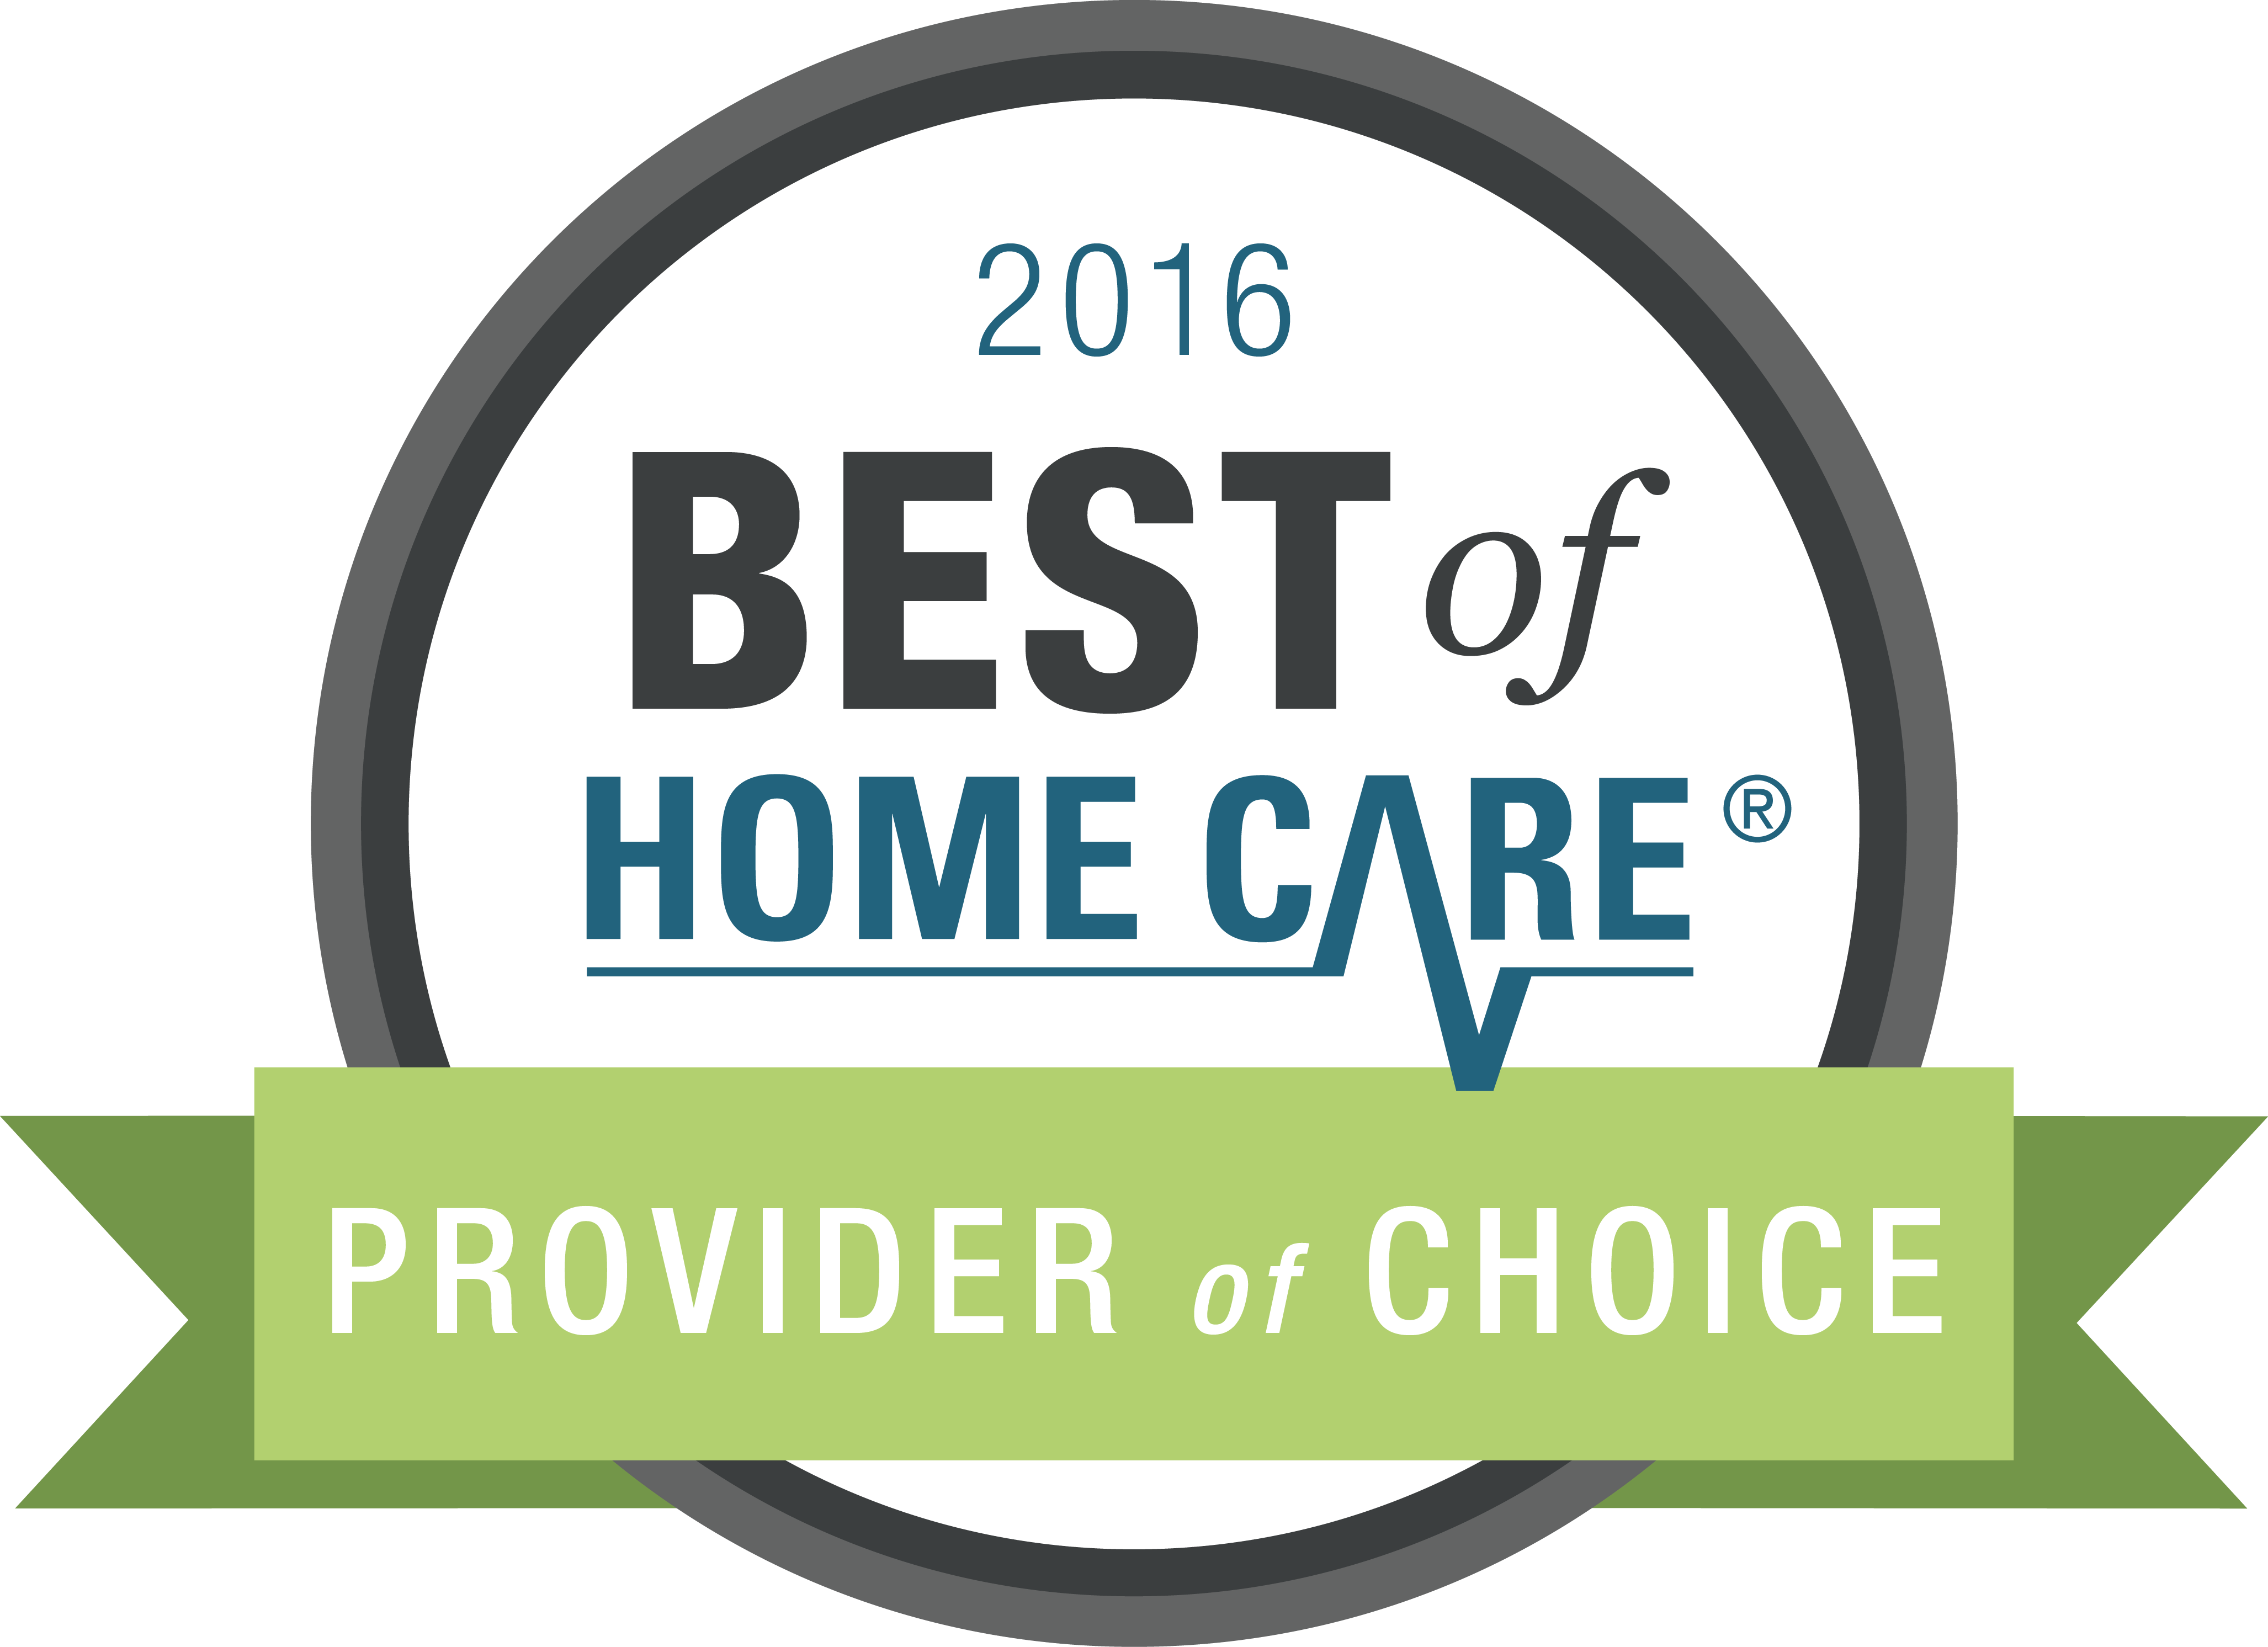 Danville Support Services wins Best of Home Care - Provider of Choice 2016